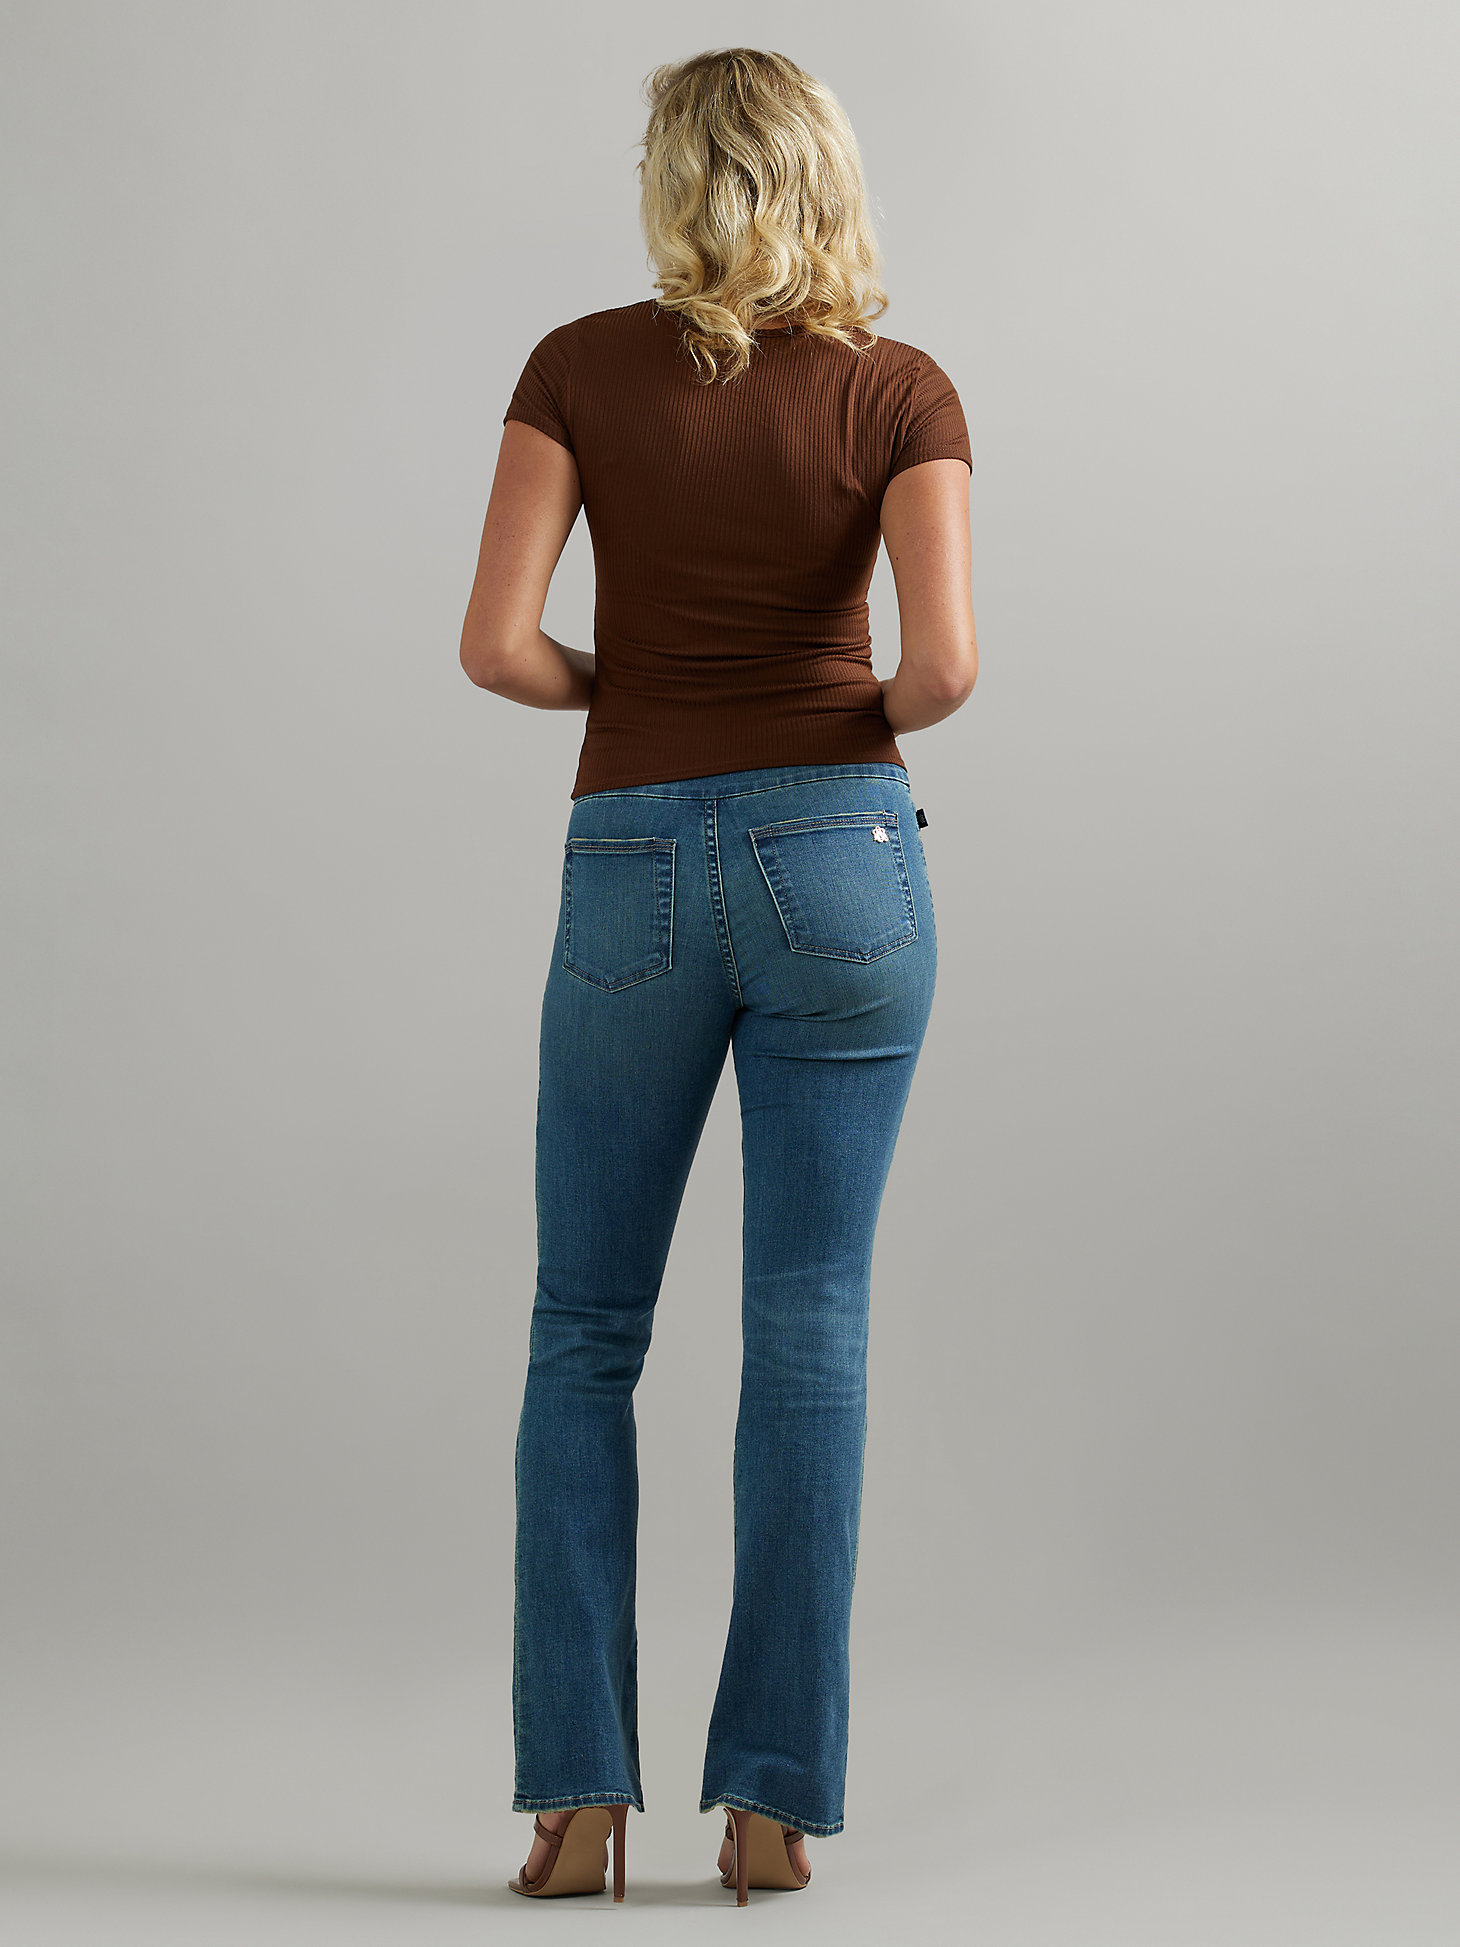 Women's Fever Bootcut Jean in That Girl alternative view 1